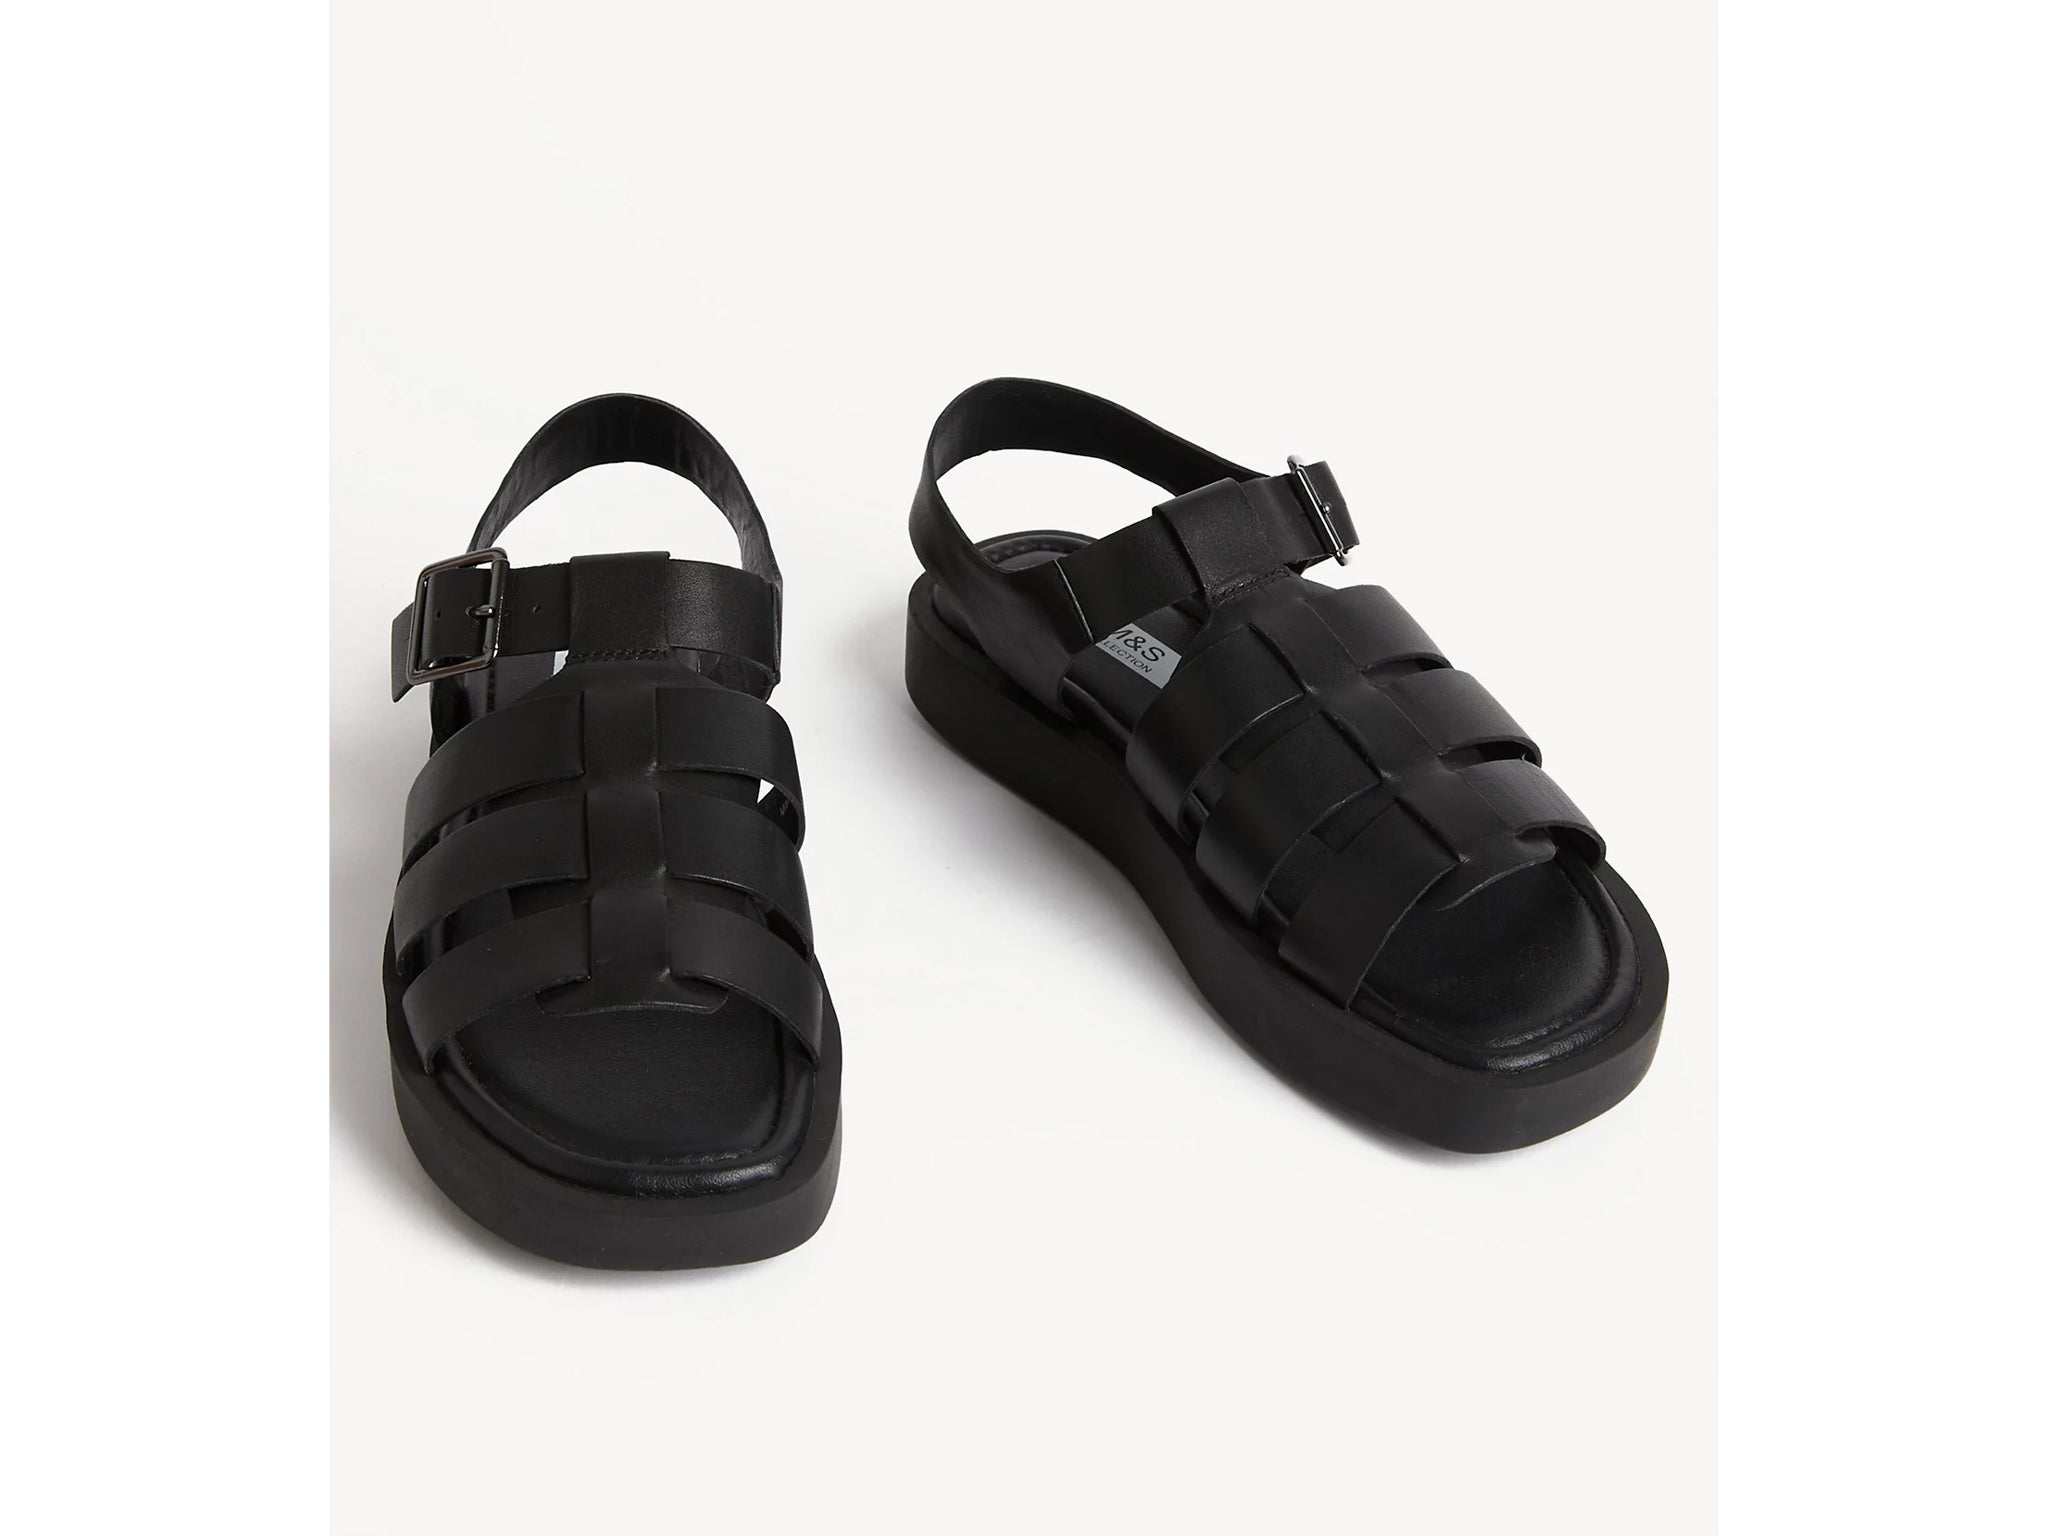 M&S’s dupes of The Row’s fisherman sandals are summer must-haves